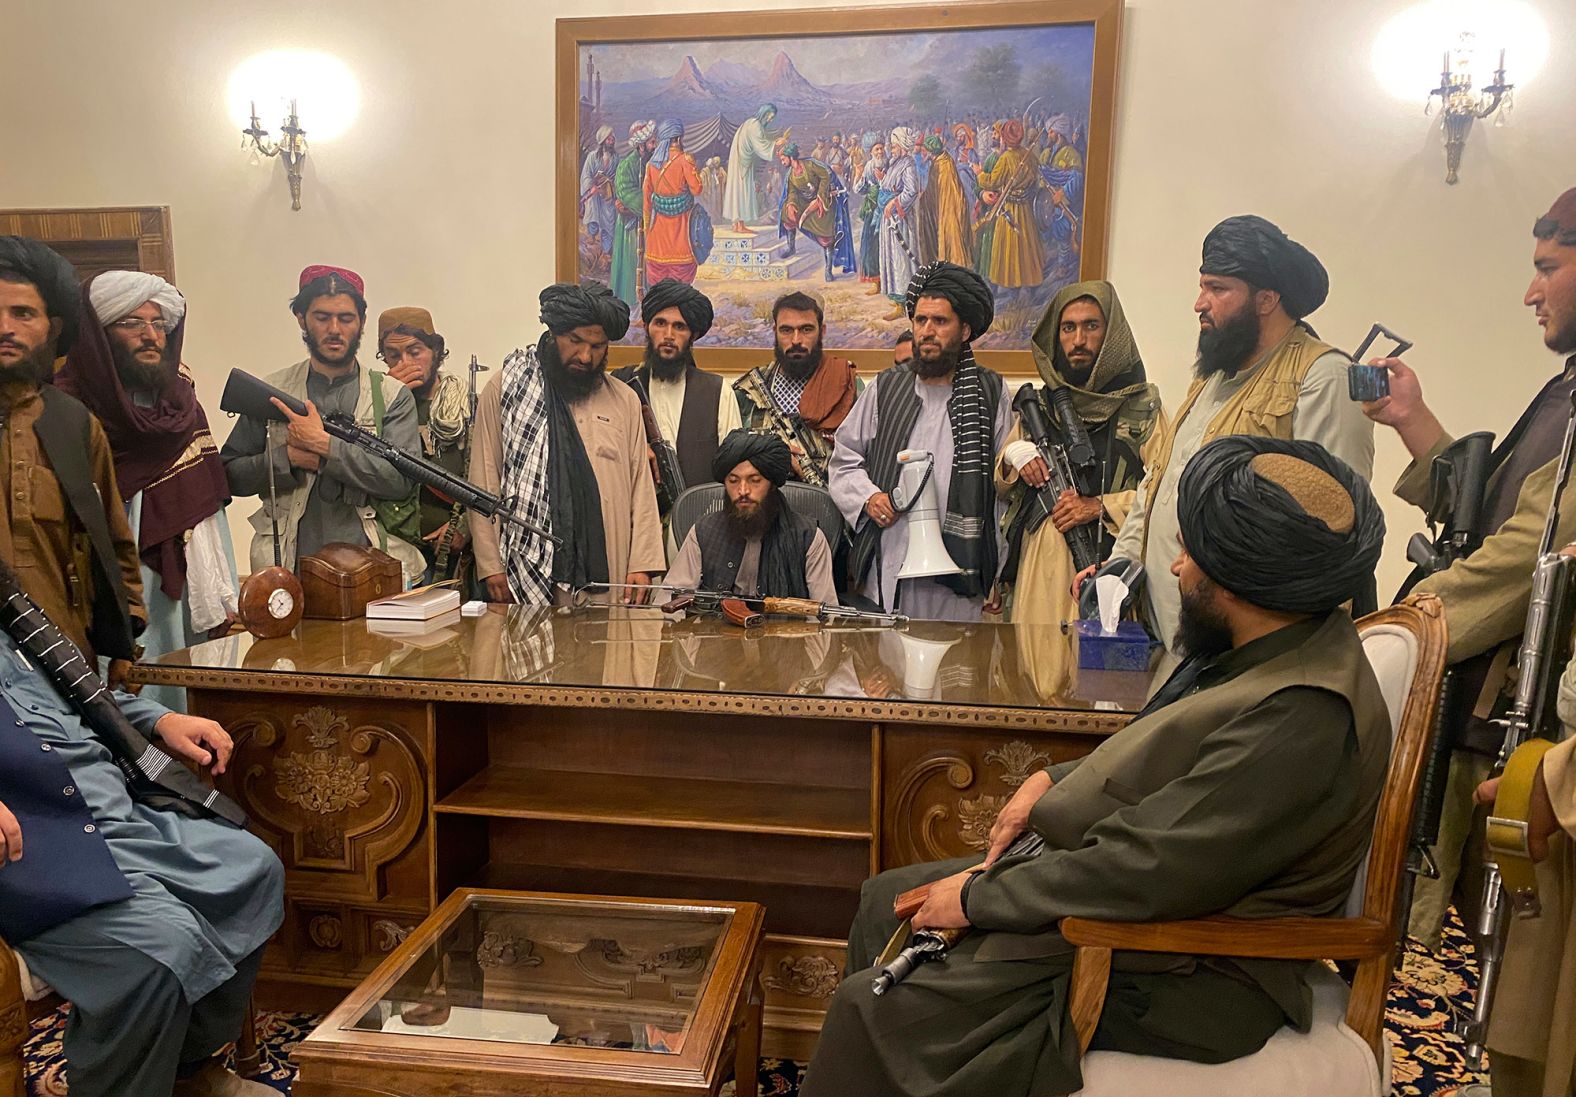 Taliban fighters sit inside the presidential palace in Kabul in August 2021. The palace was <a href="https://www.cnn.com/2021/08/15/politics/biden-administration-taliban-kabul-afghanistan/index.html" target="_blank">handed over to the Taliban</a> after being vacated hours earlier by Afghan government officials.  Many of Afghanistan's major cities had already fallen to the insurgent group with little to no resistance.